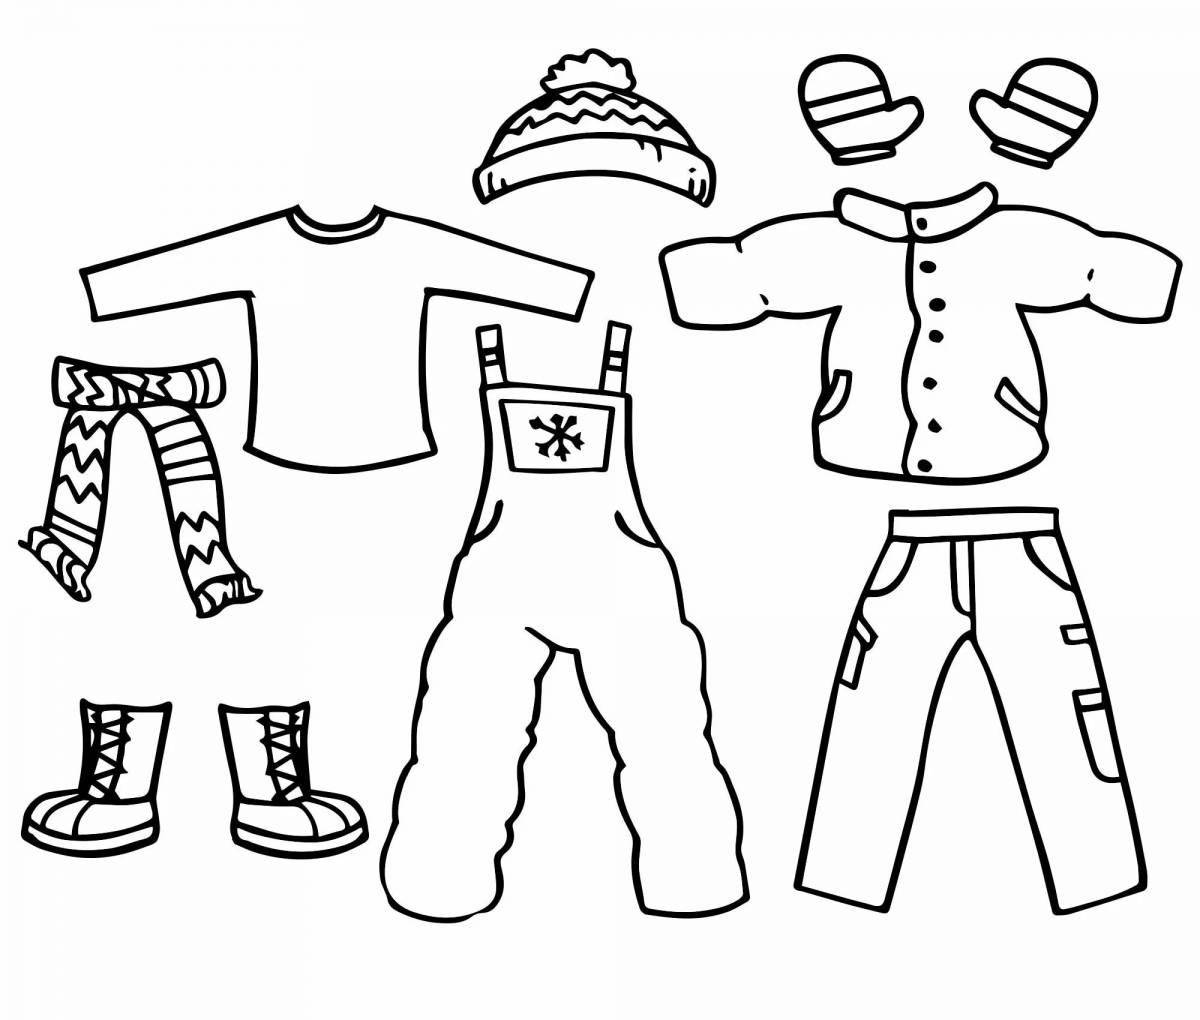 Colorful coloring page of clothes for 2-3 year olds